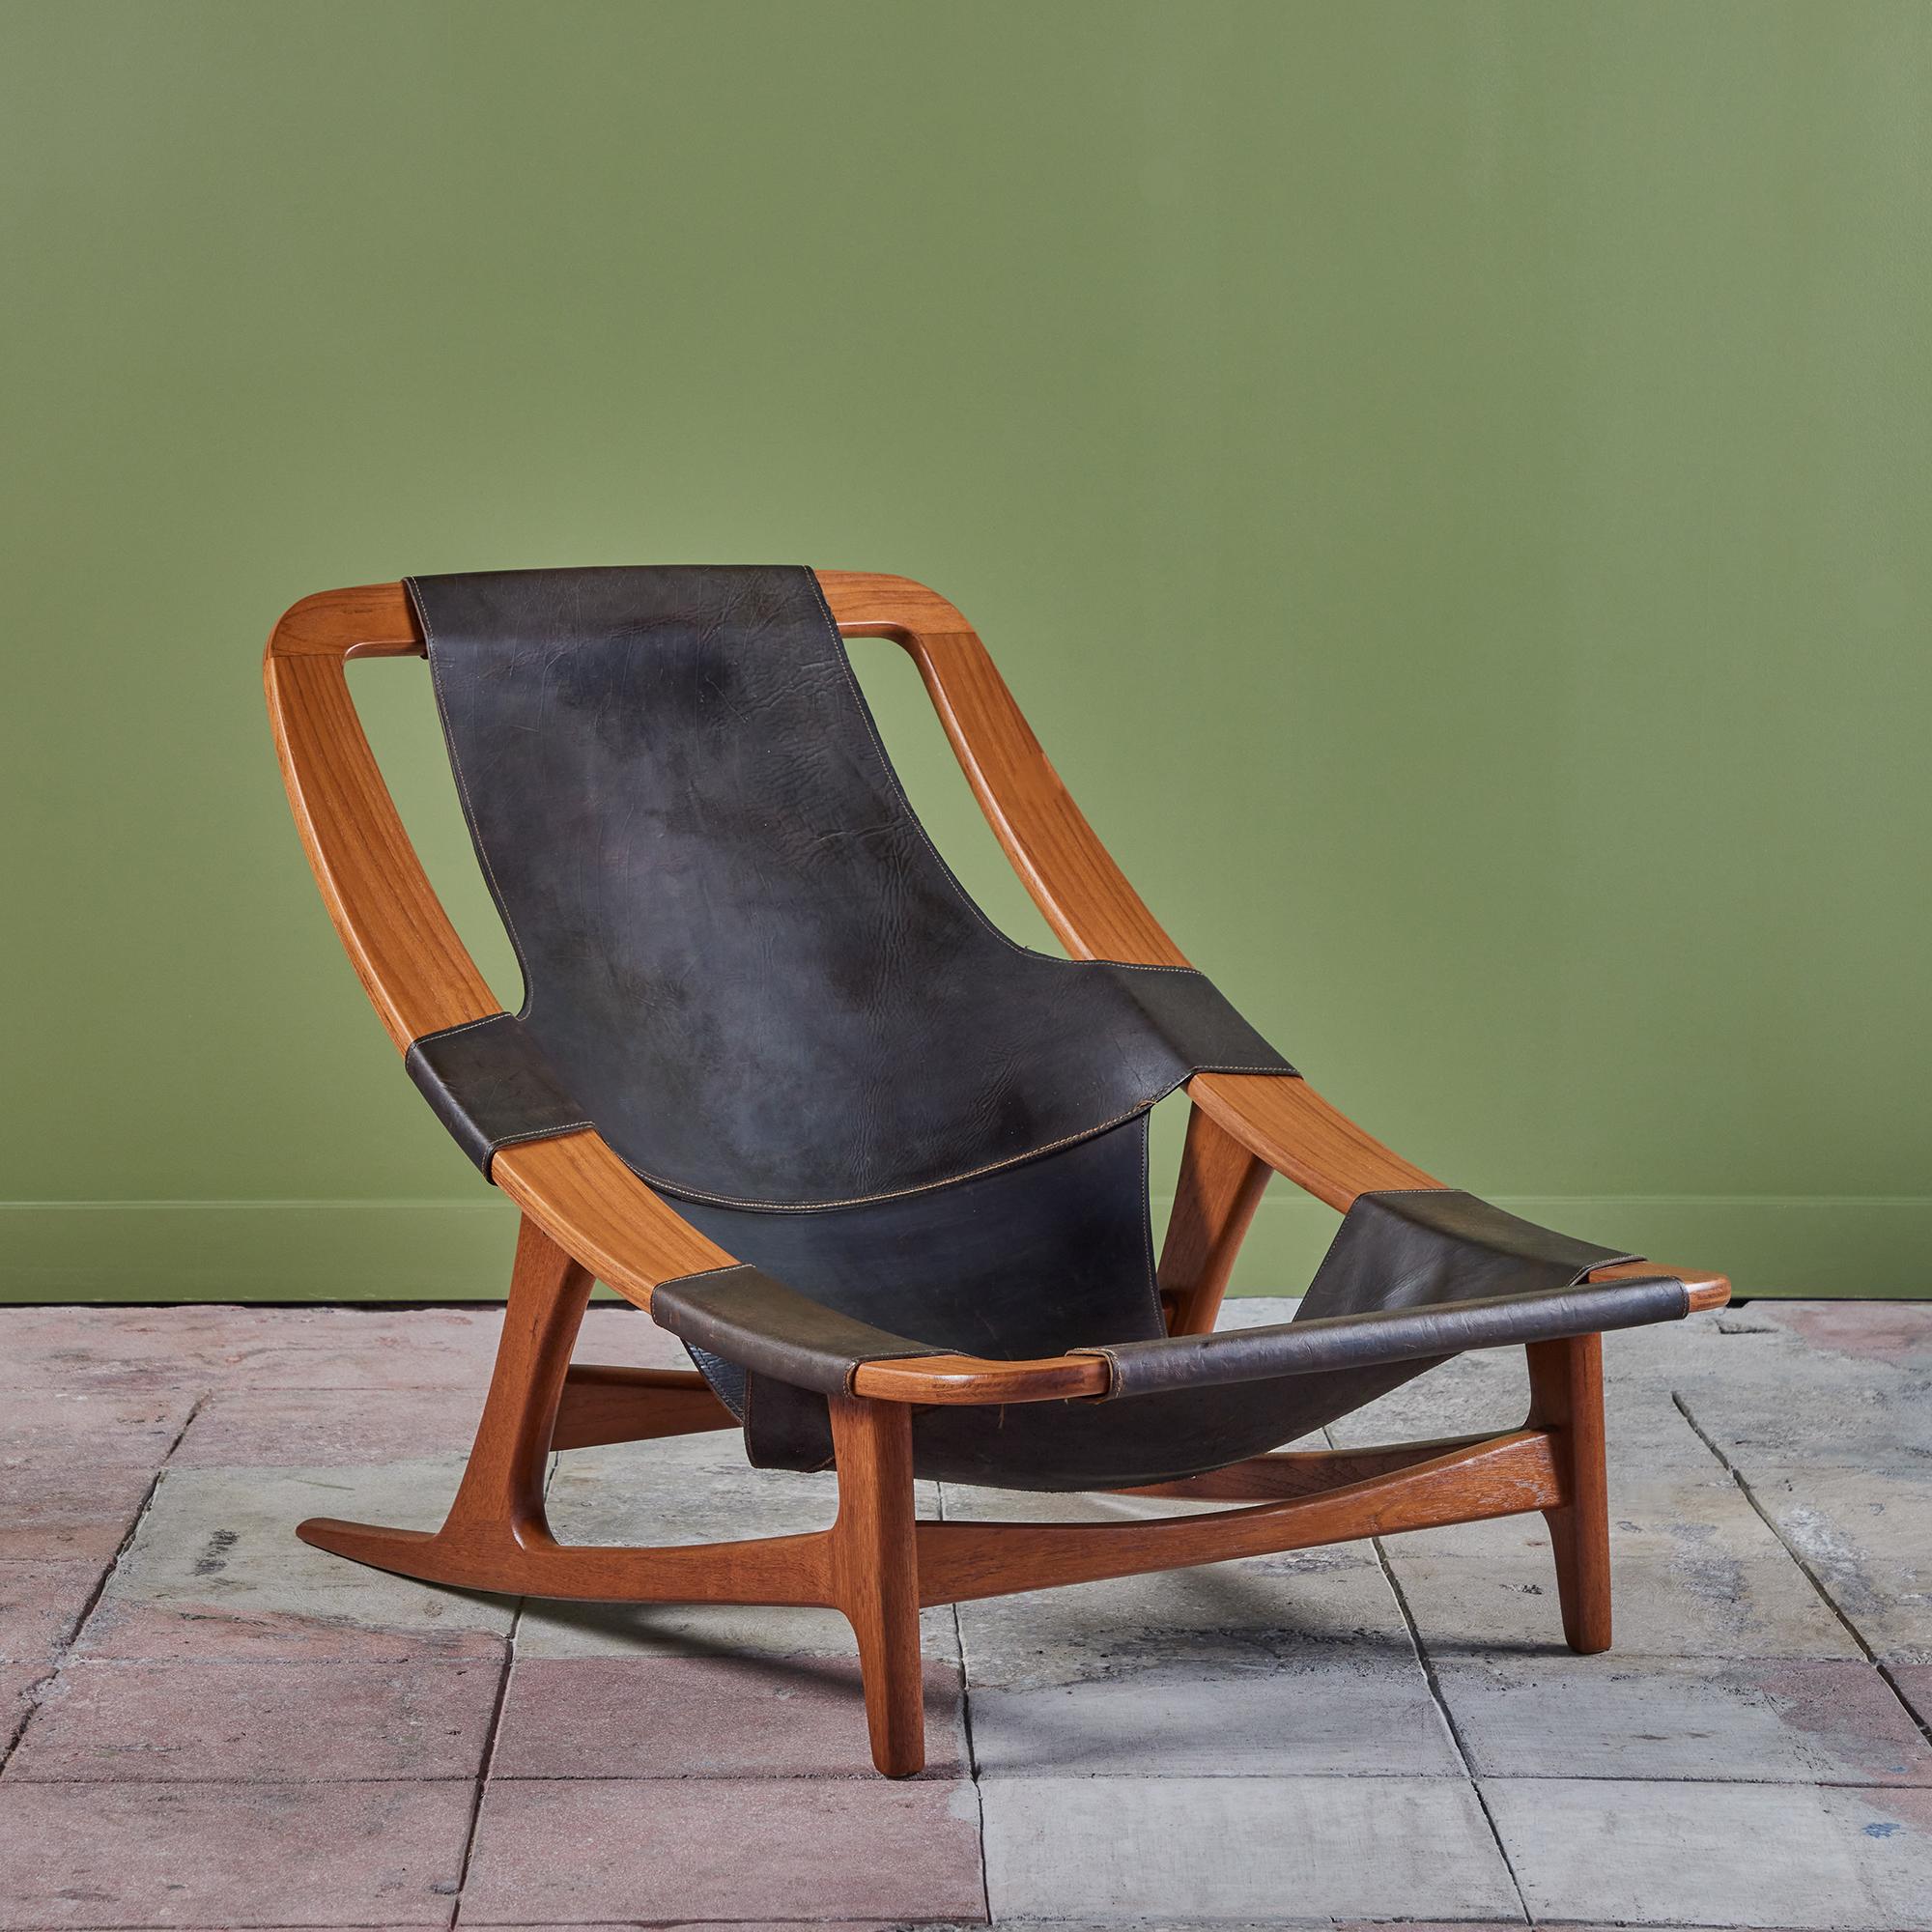 Designed in the 1950s by Arne Tidemand-Ruud for Norwegian company Norcraft. The solid teak frame is wrapped with a black leather sling seat. The lounge chair is adjustable to recline to a slightly more relaxed position.

Dimensions
27.25